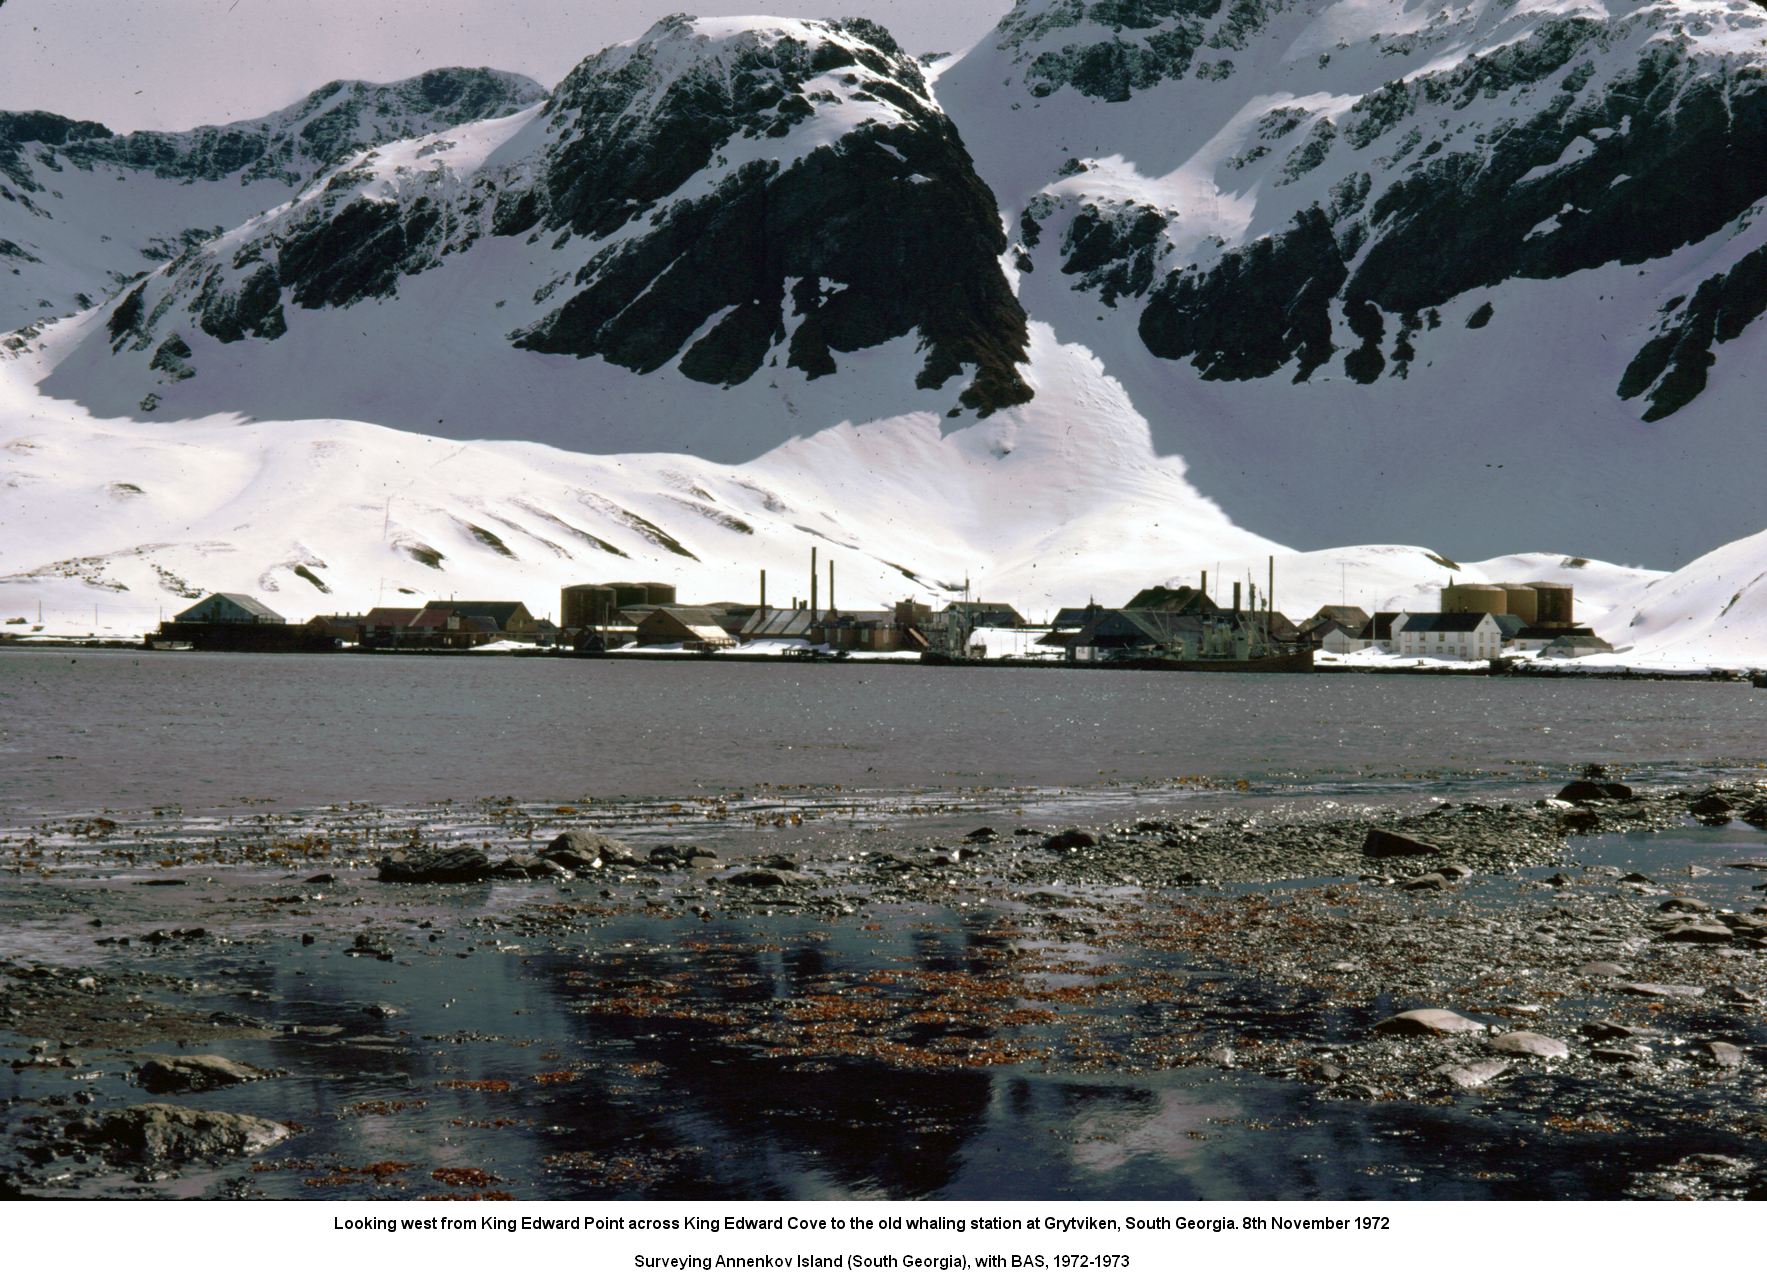 Looking west from King Edward Point across King Edward Cove to the old whaling station at Grytviken, South Georgia. 8th November 1972.